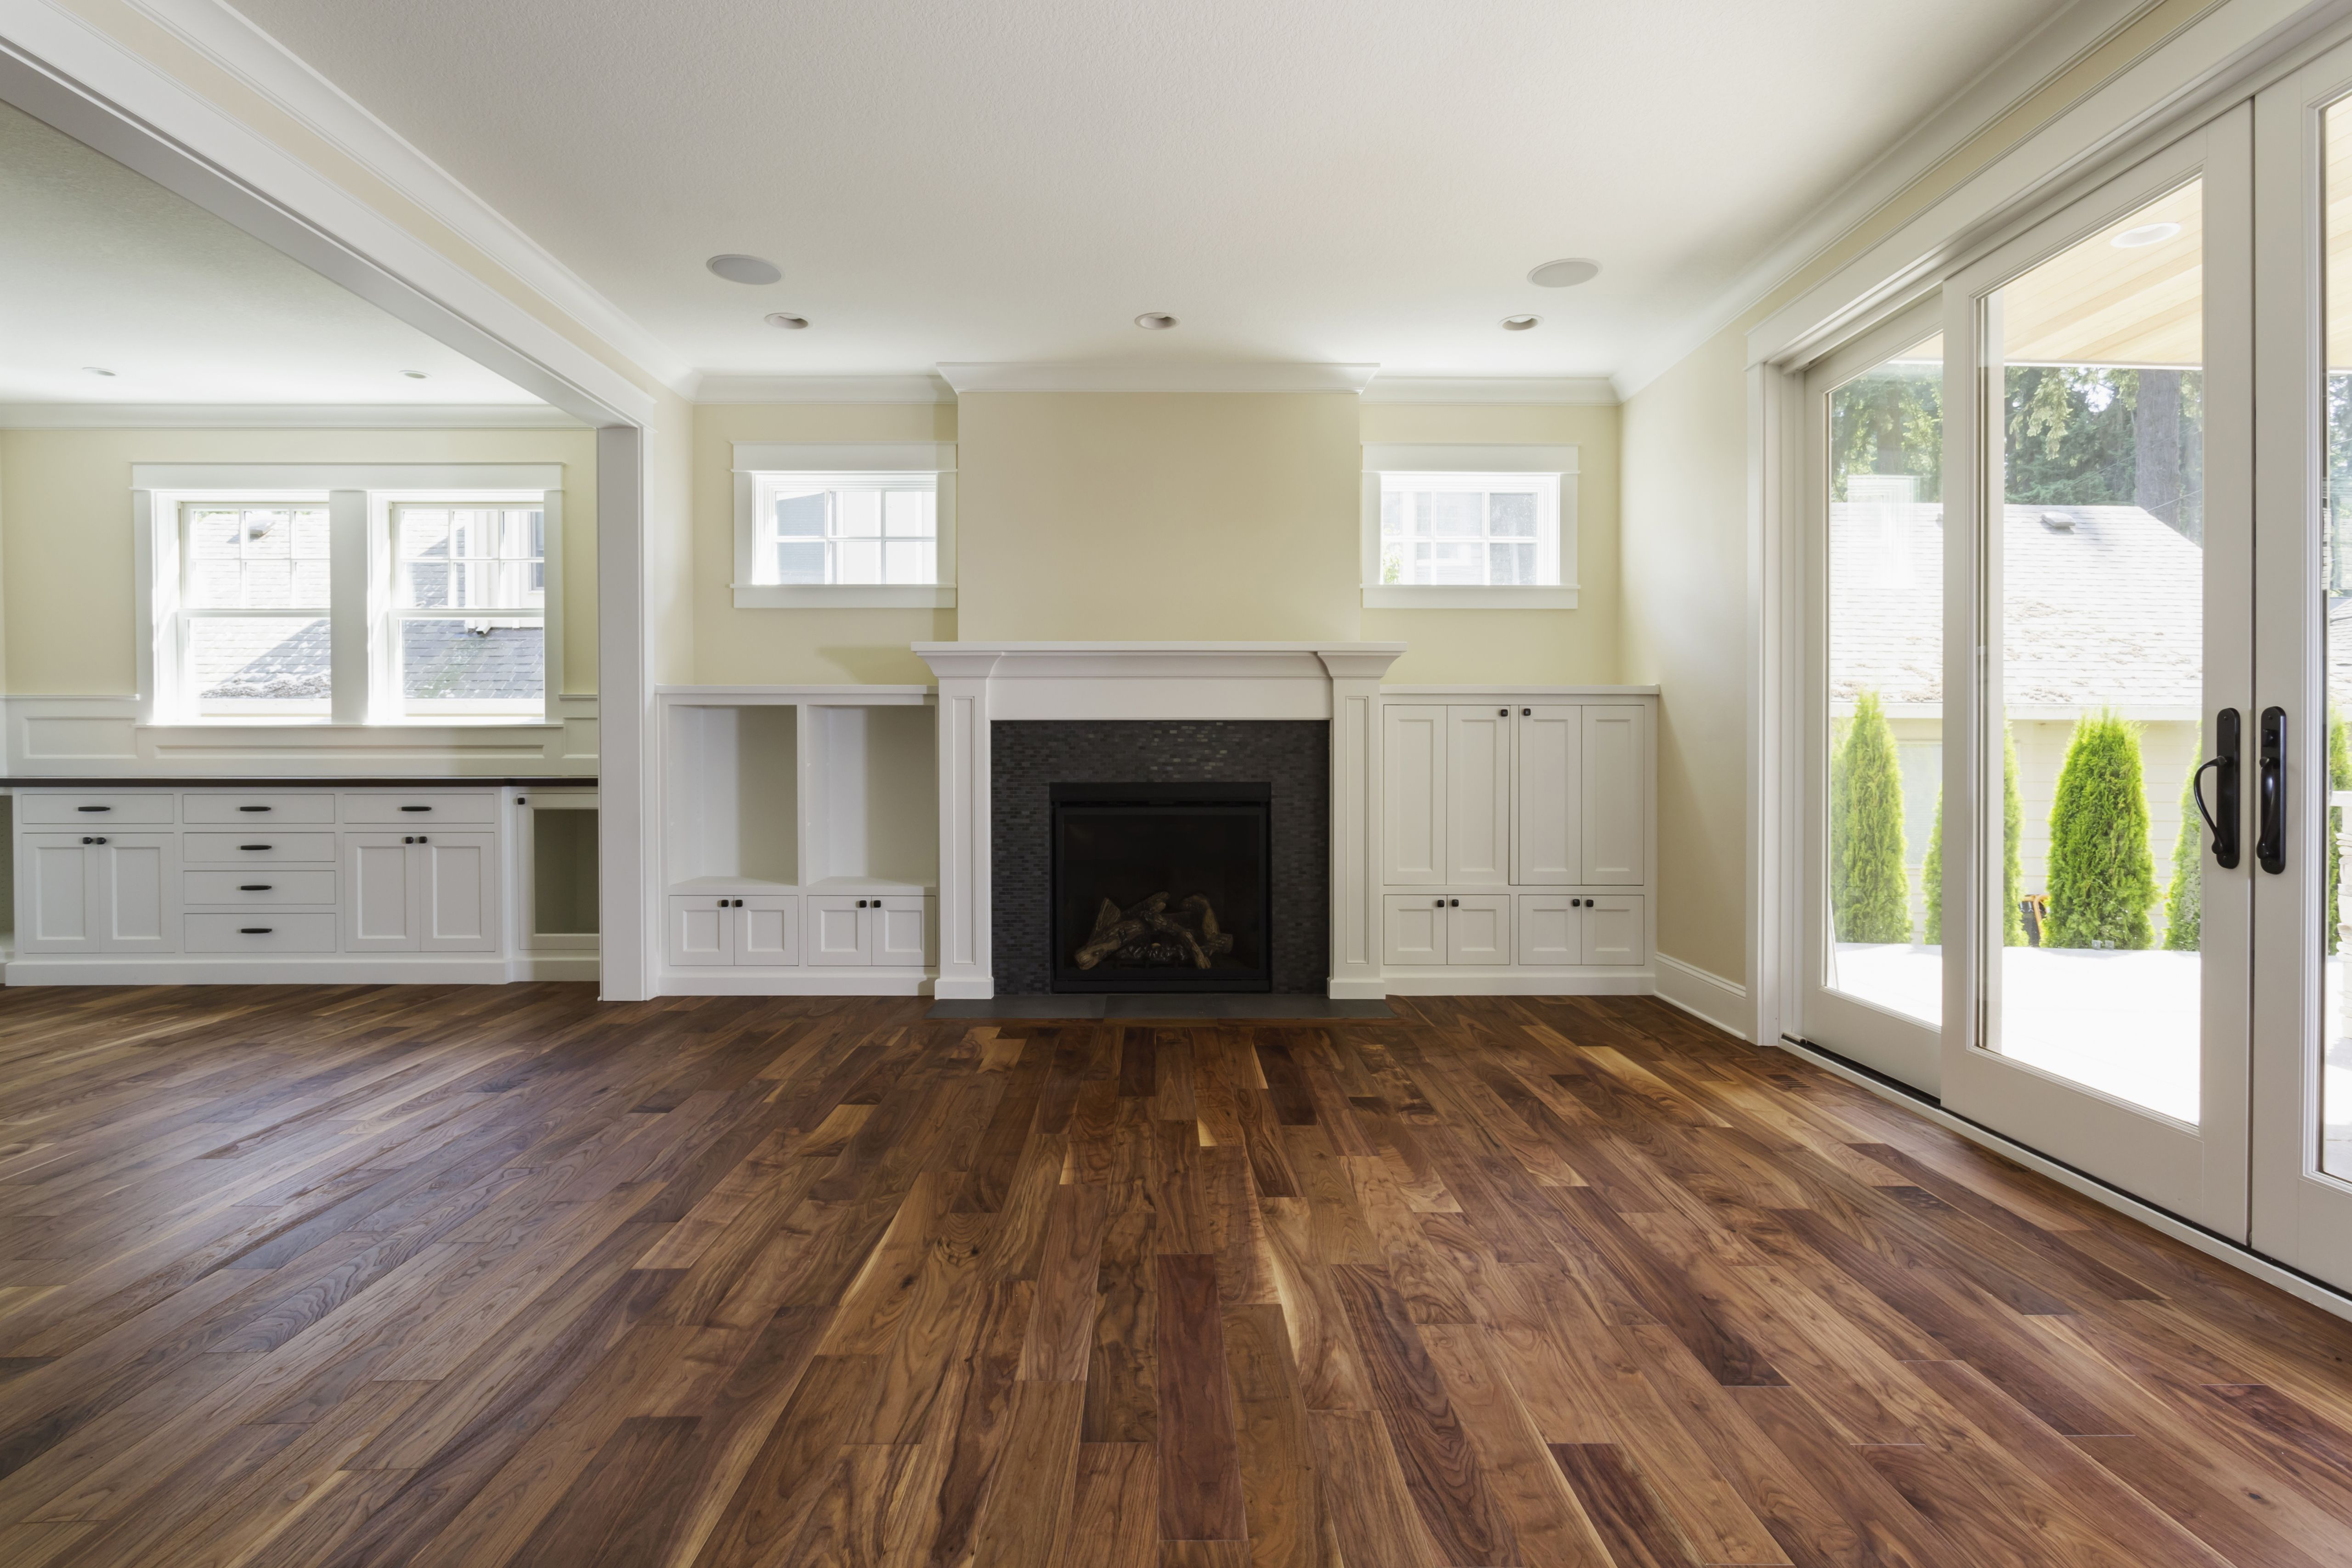 Design Ideas For Living Room With Hardwood Floors